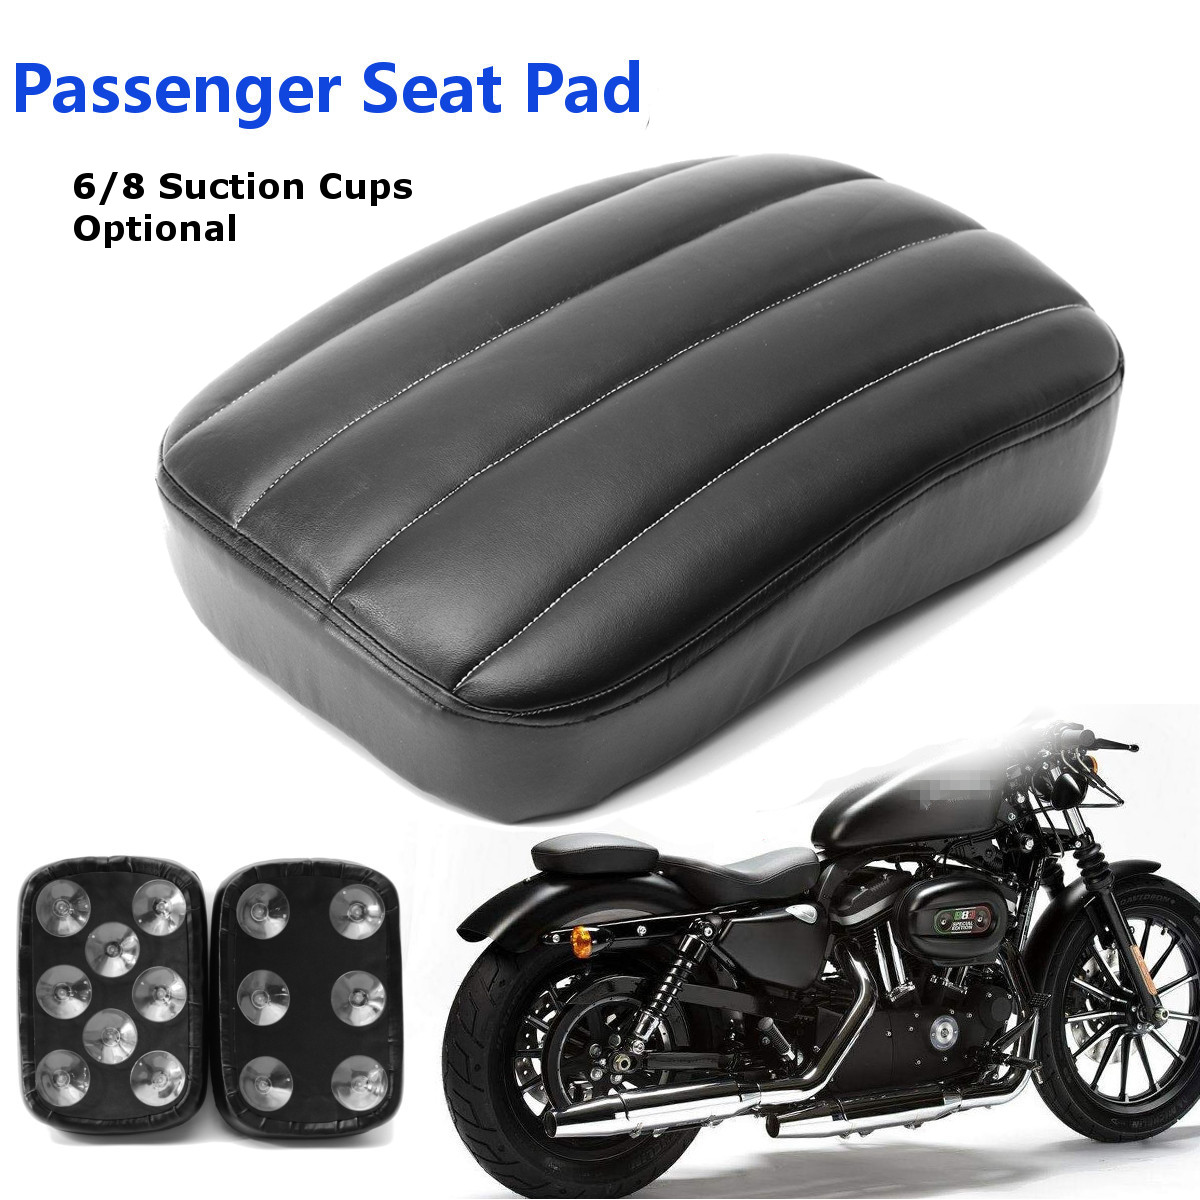 Leather Motorcycle Rear Pillion Passenger Seat Pad 6 Suction Cups For Harley 883